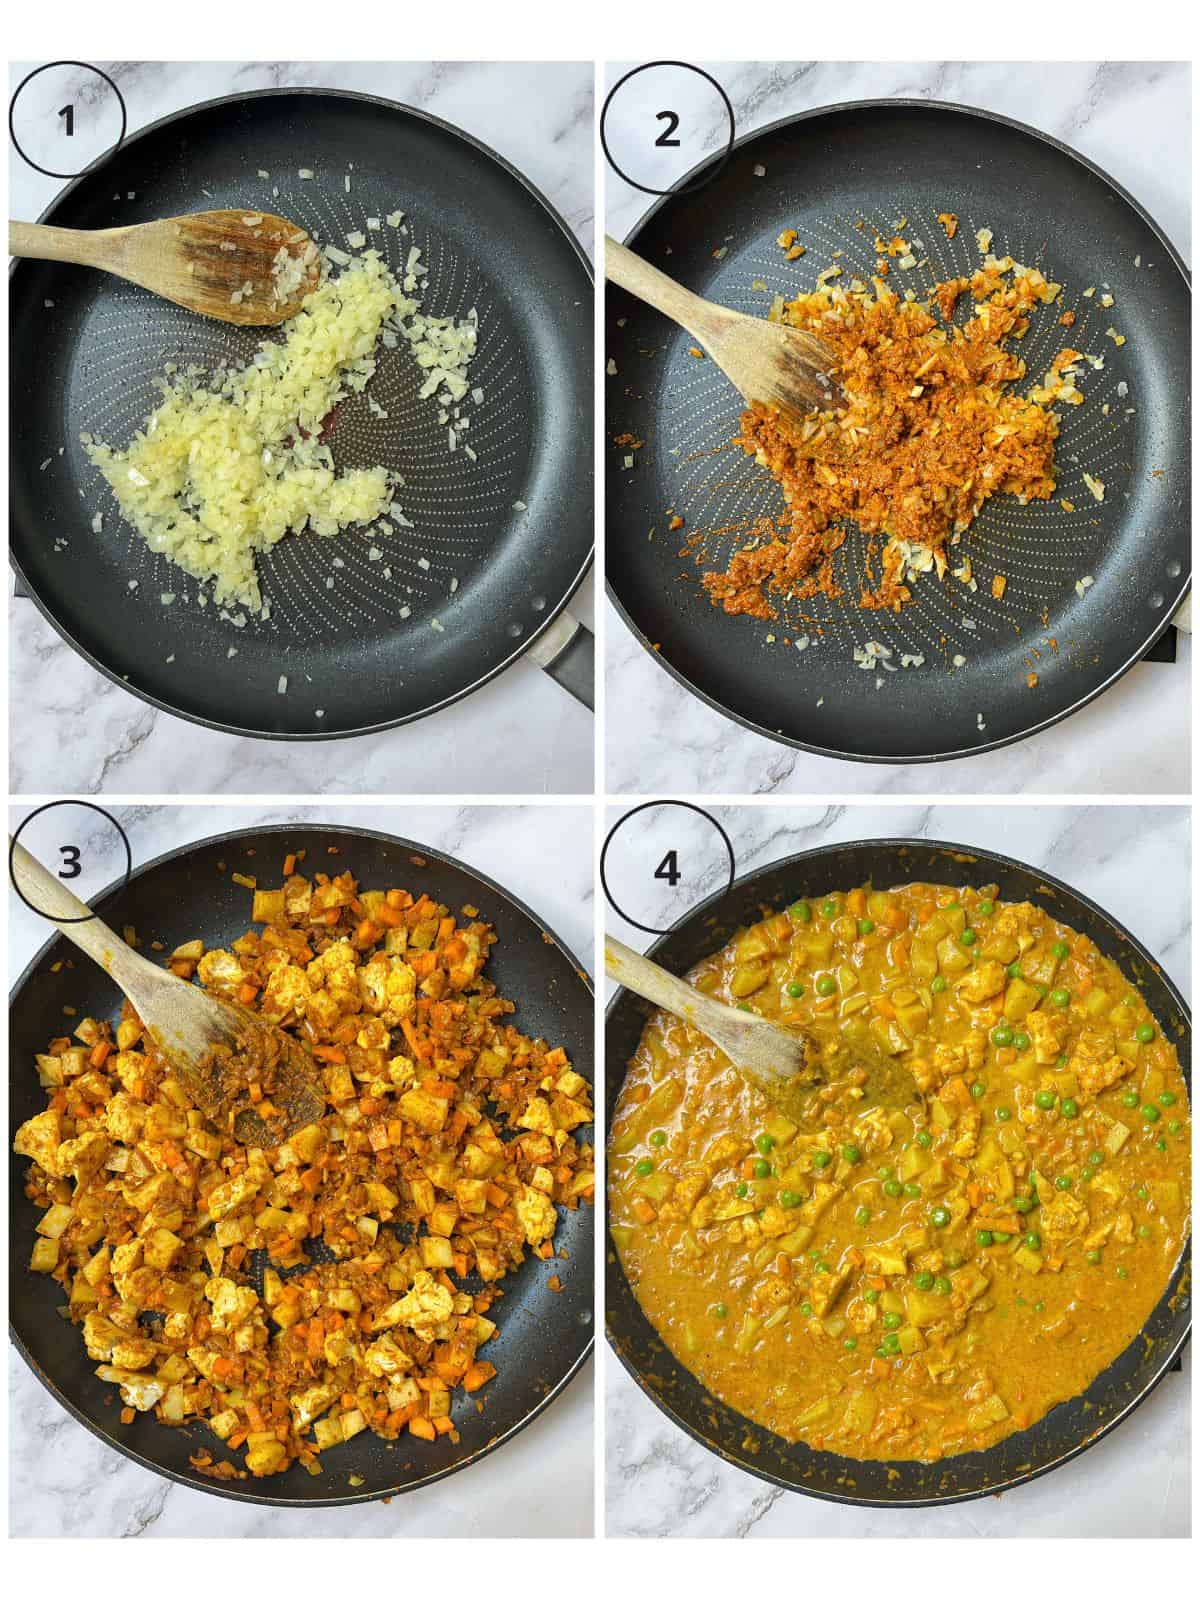 A collage of four photos showing the stages of making a vegetable curry in a frying pan.